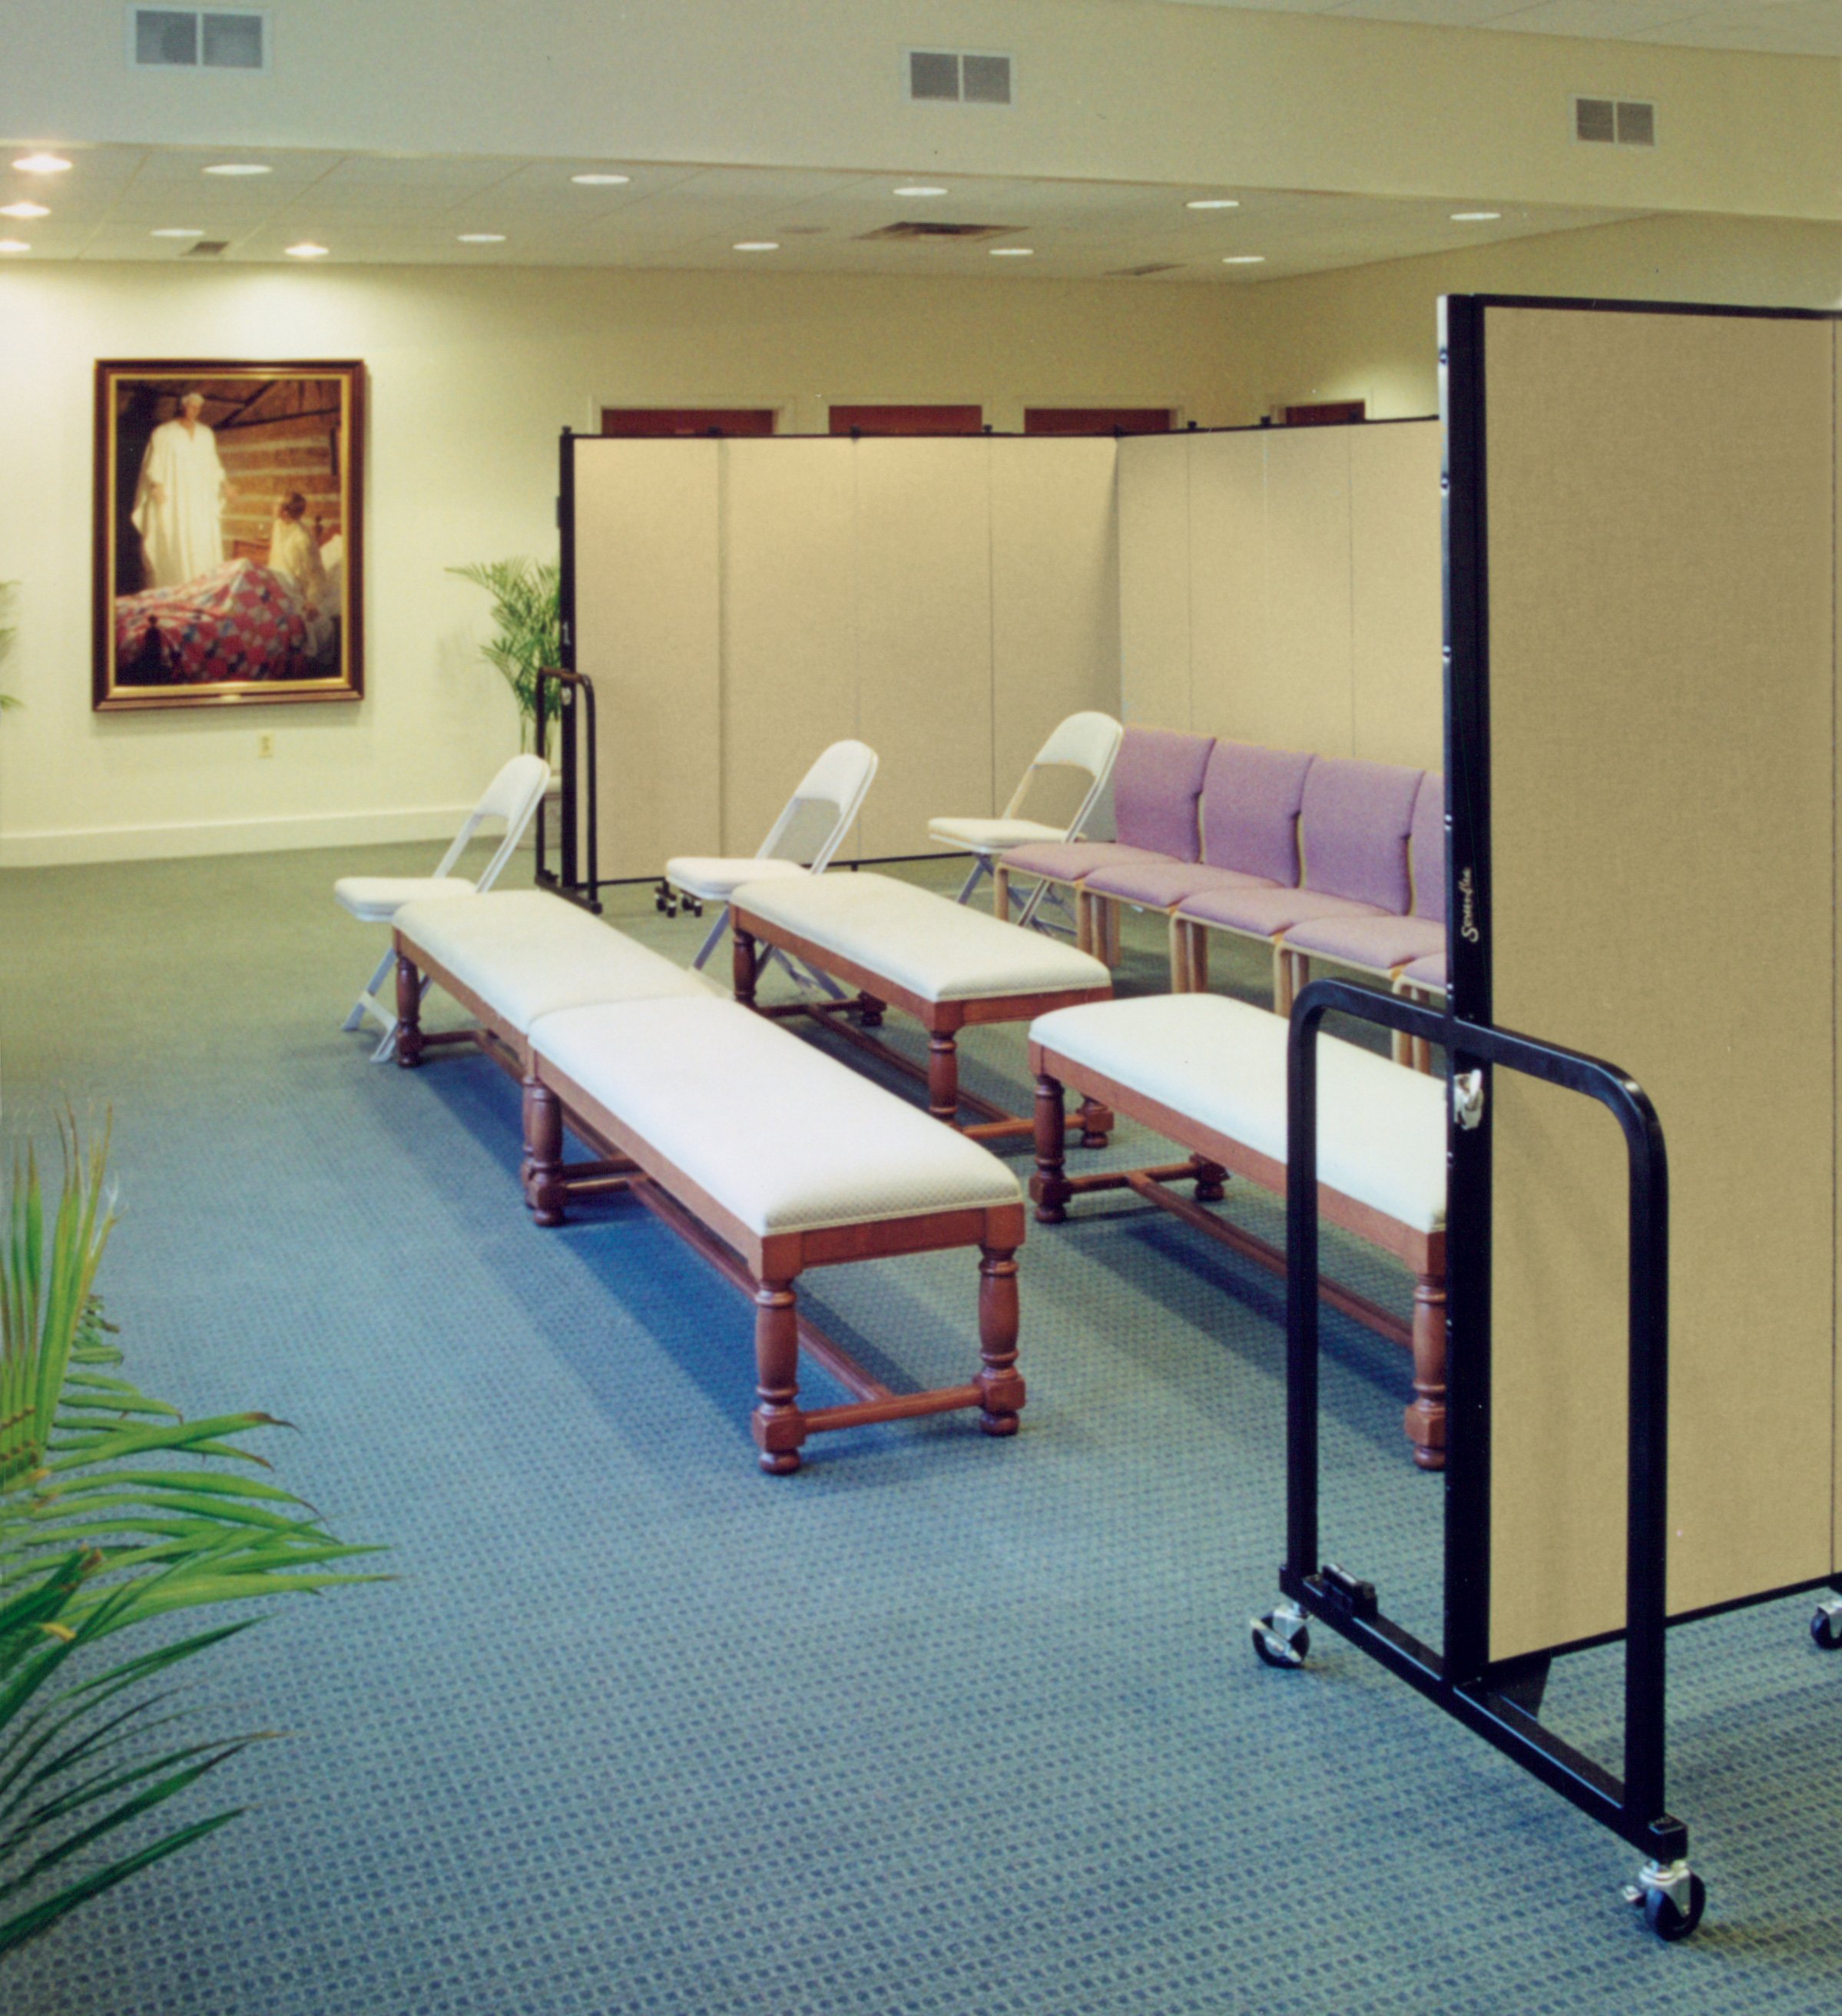 A row of chairs follows two rows of benches in a prayer room that are shielded by a set of room dividers